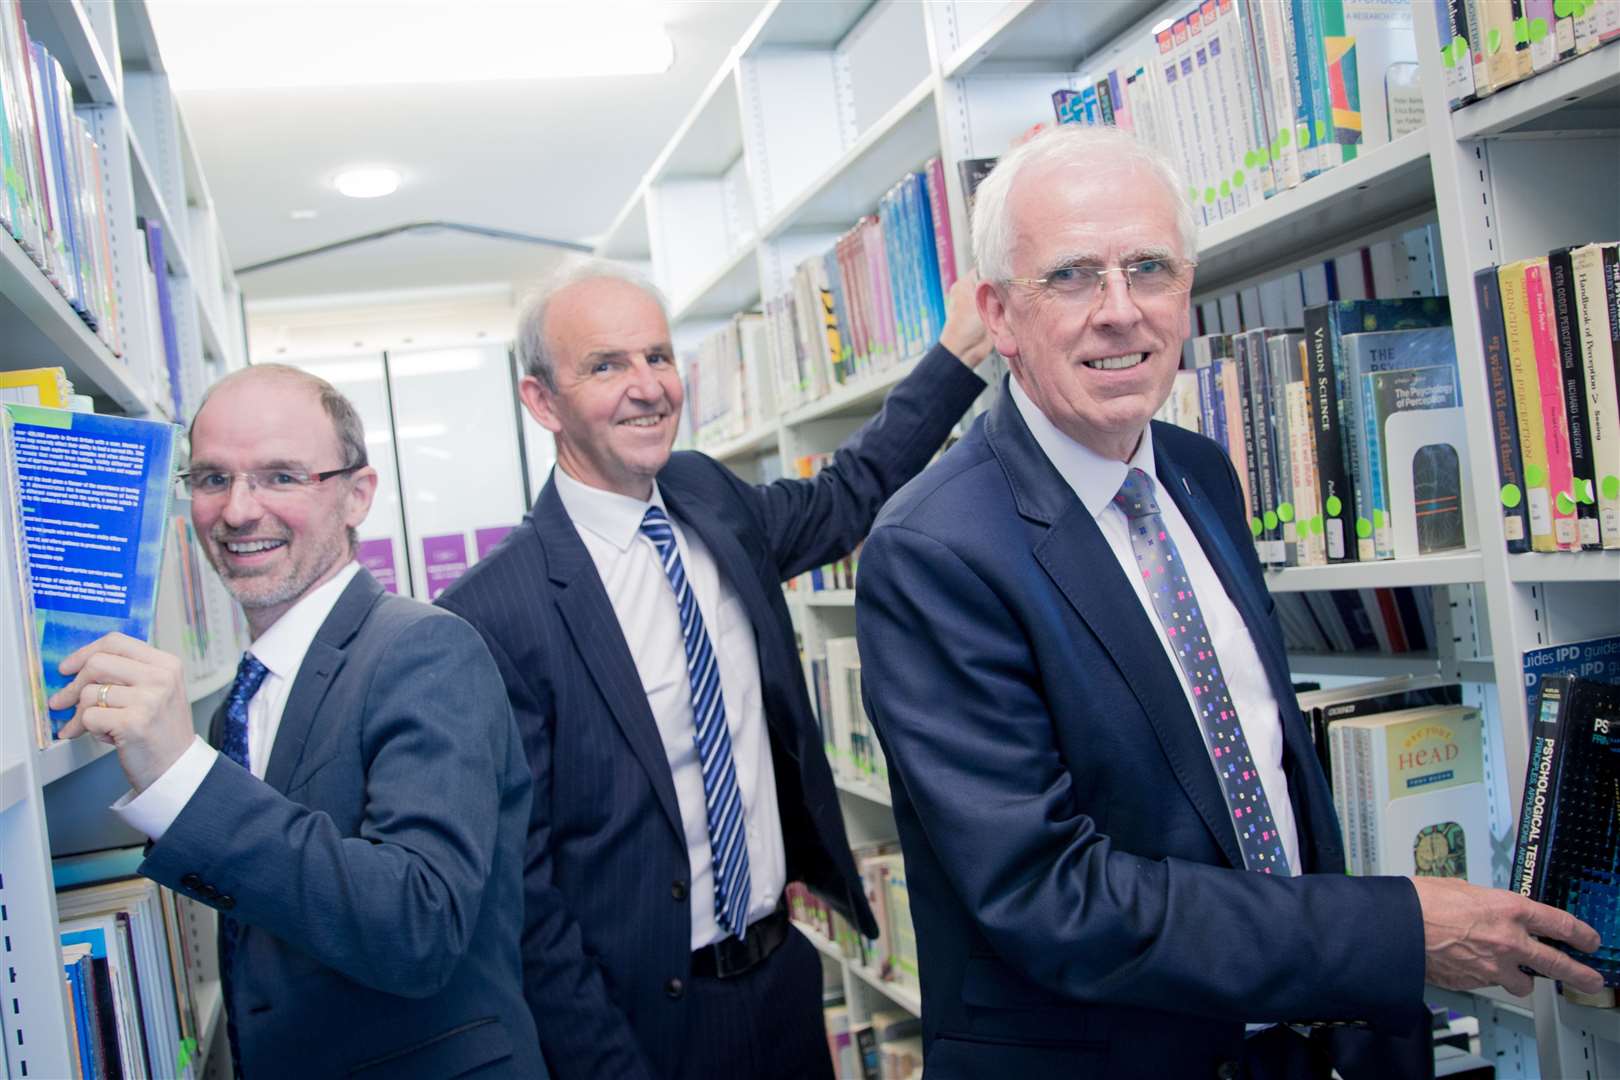 RGU's Chris Moule, Professor John Harper and Aberdeenshire Council leader Jim Gifford at the launch of the library network.